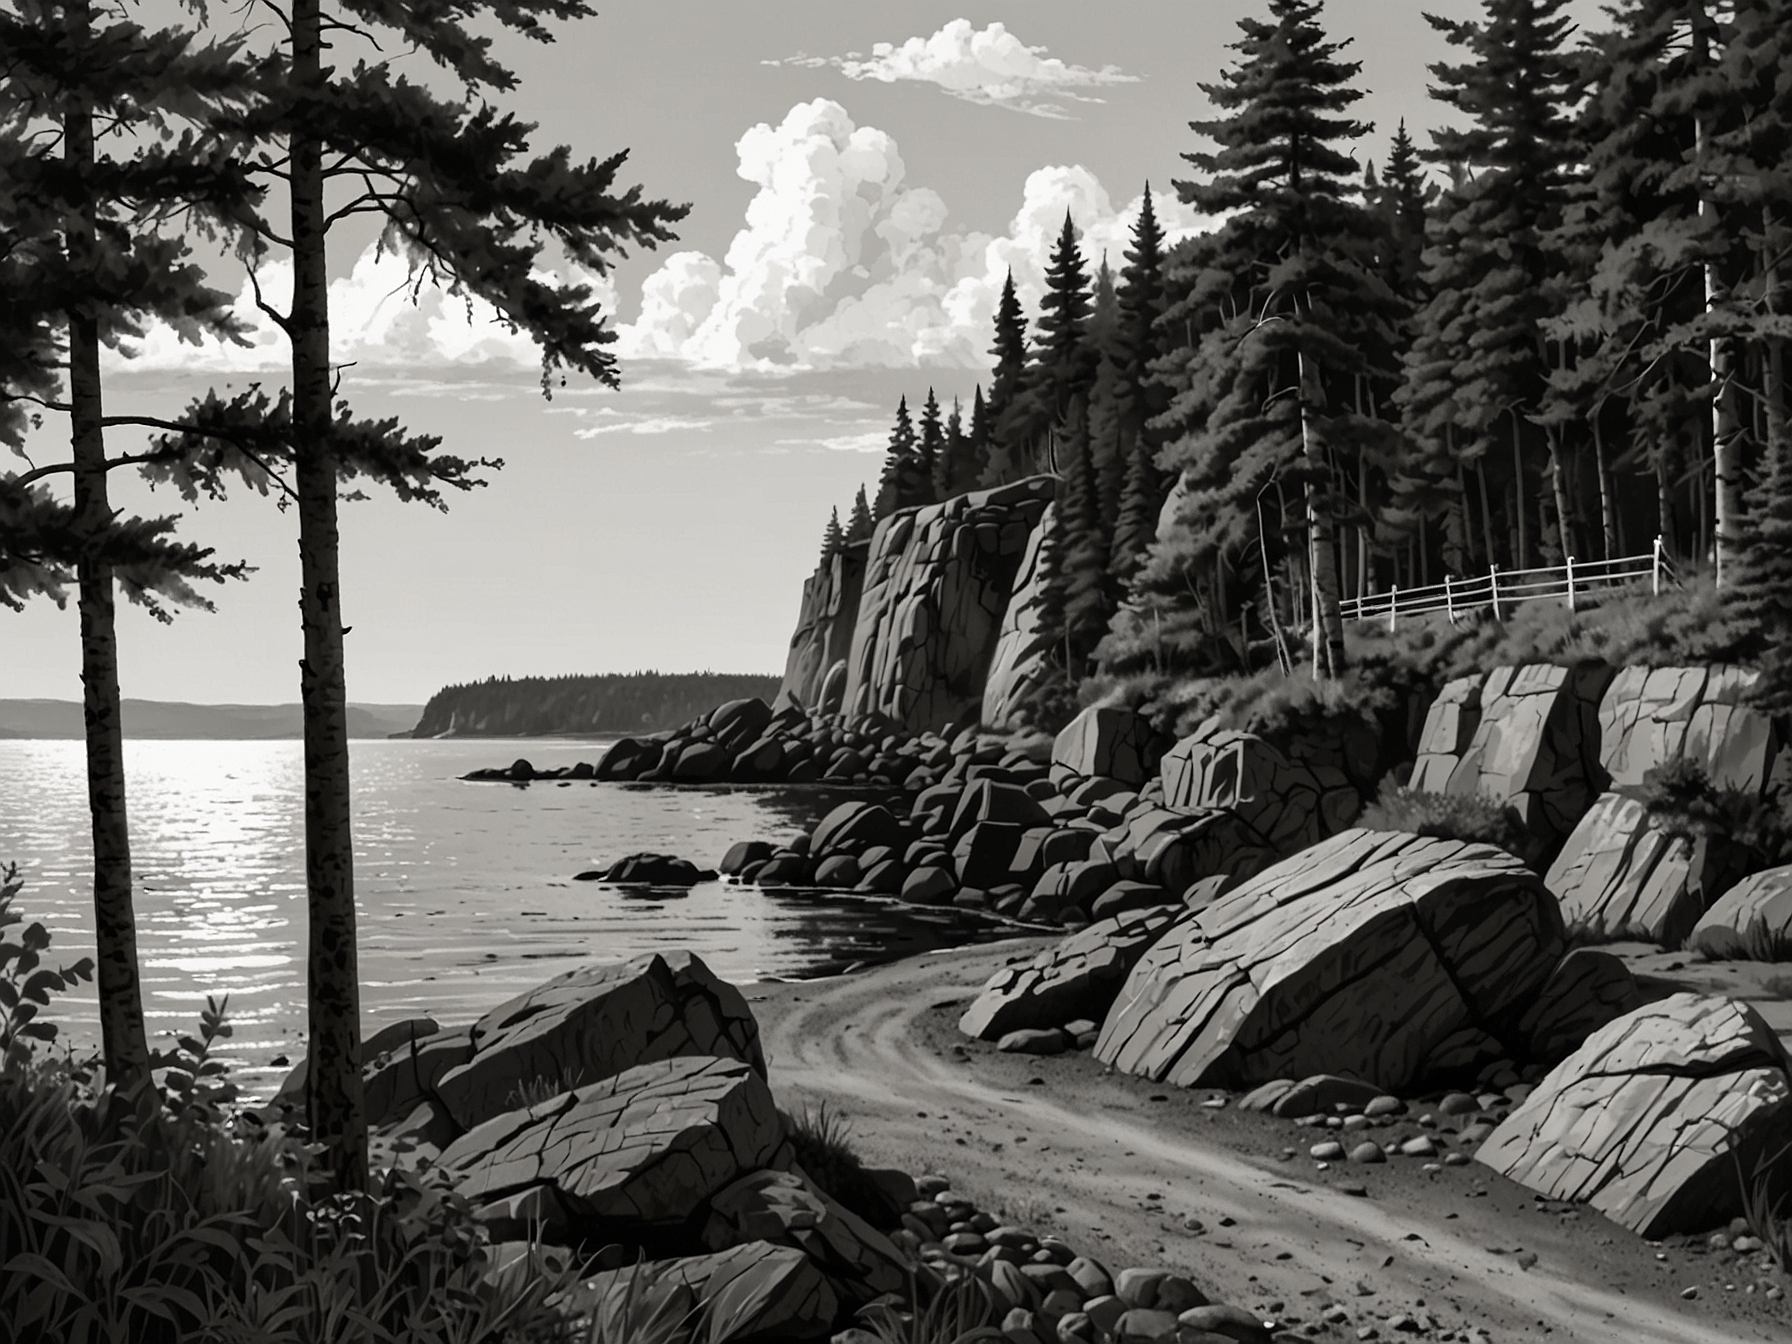 The North Shore Scenic Drive along Lake Superior in Minnesota, with breathtaking lake views, dense forests, waterfalls, and the iconic Split Rock Lighthouse in the background.